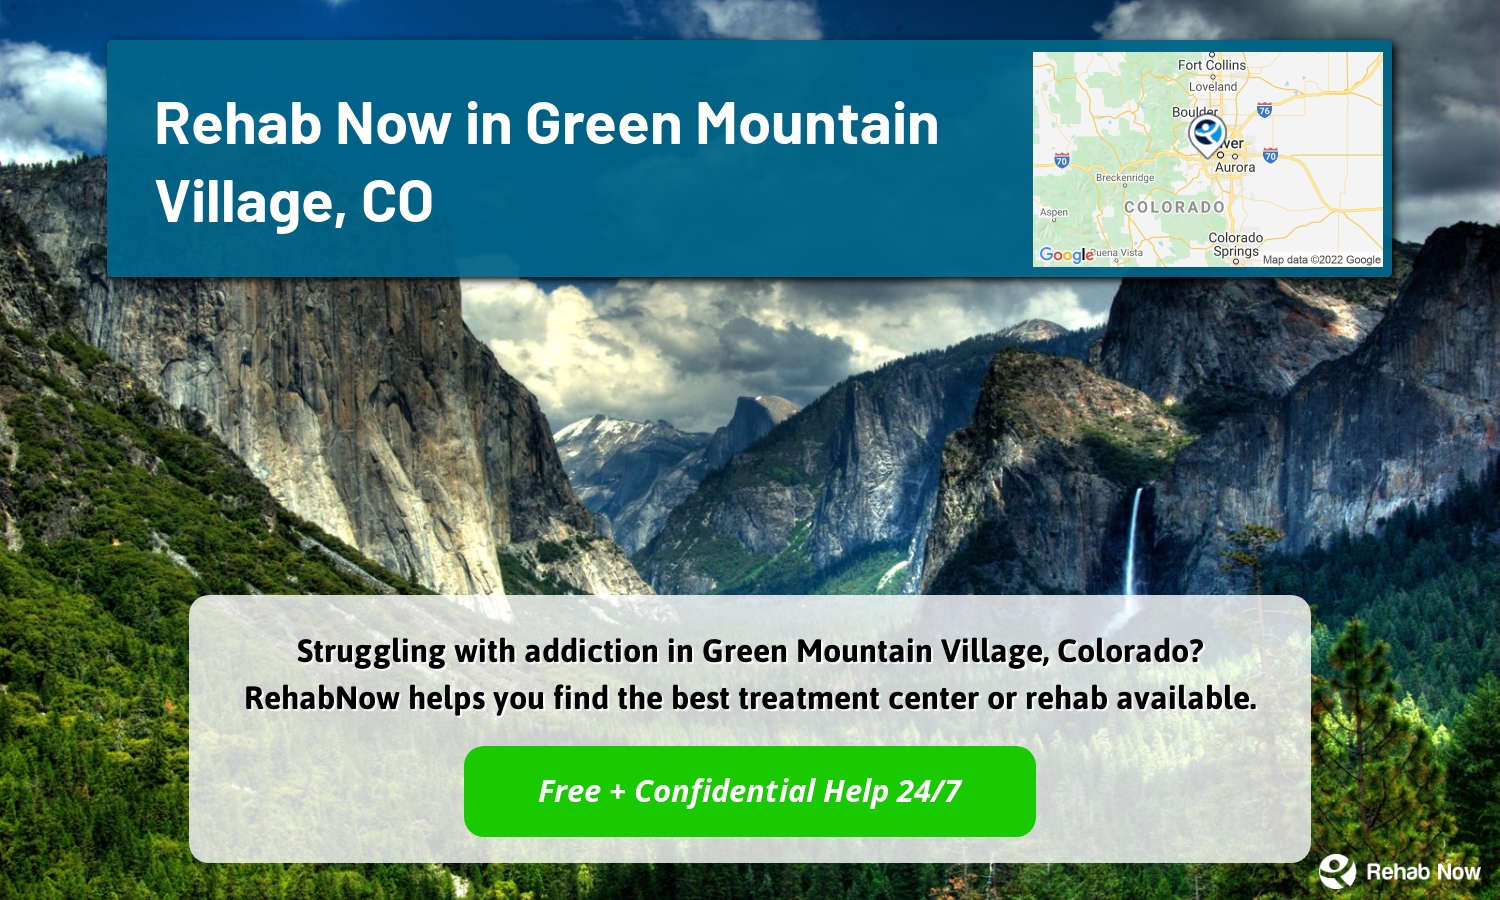 Struggling with addiction in Green Mountain Village, Colorado? RehabNow helps you find the best treatment center or rehab available.